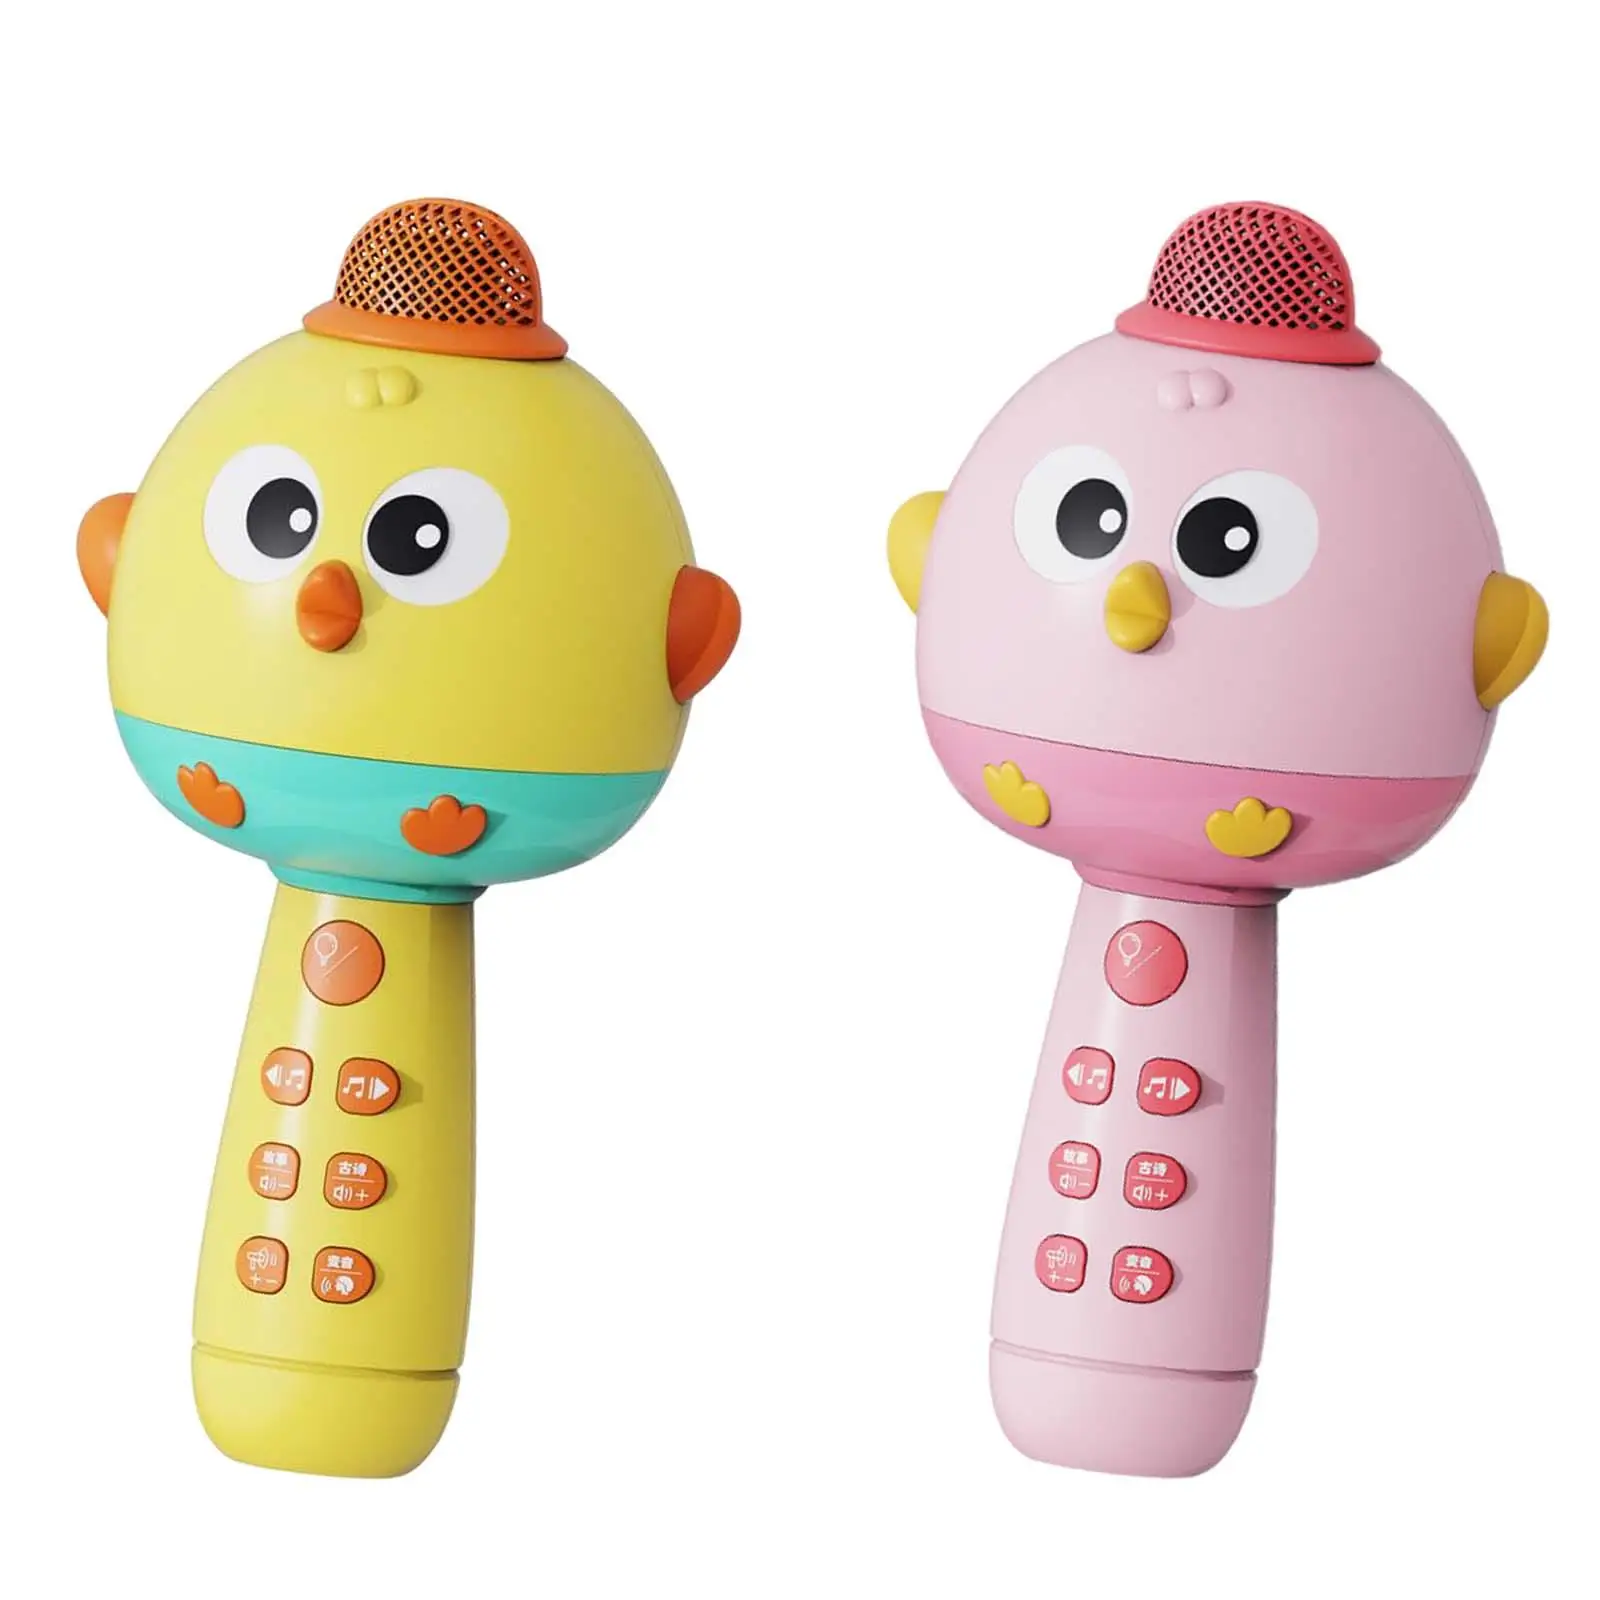 karaoke microphones Kids Funny Sing Song Toys with LED for Practice Birthday